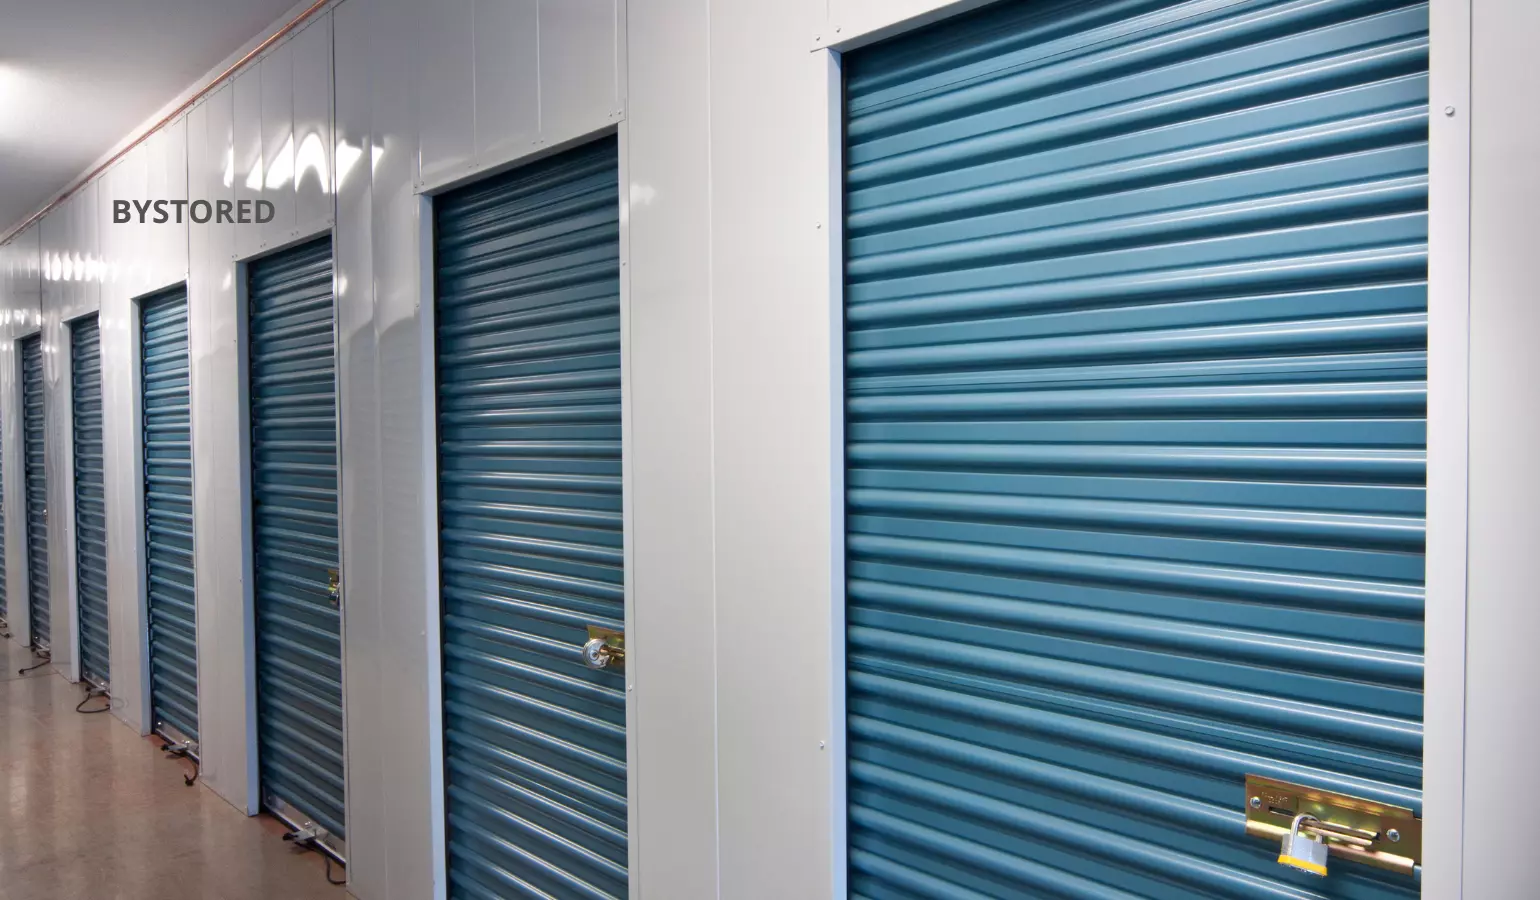 What Are The Purposes Of Using Storage Units?